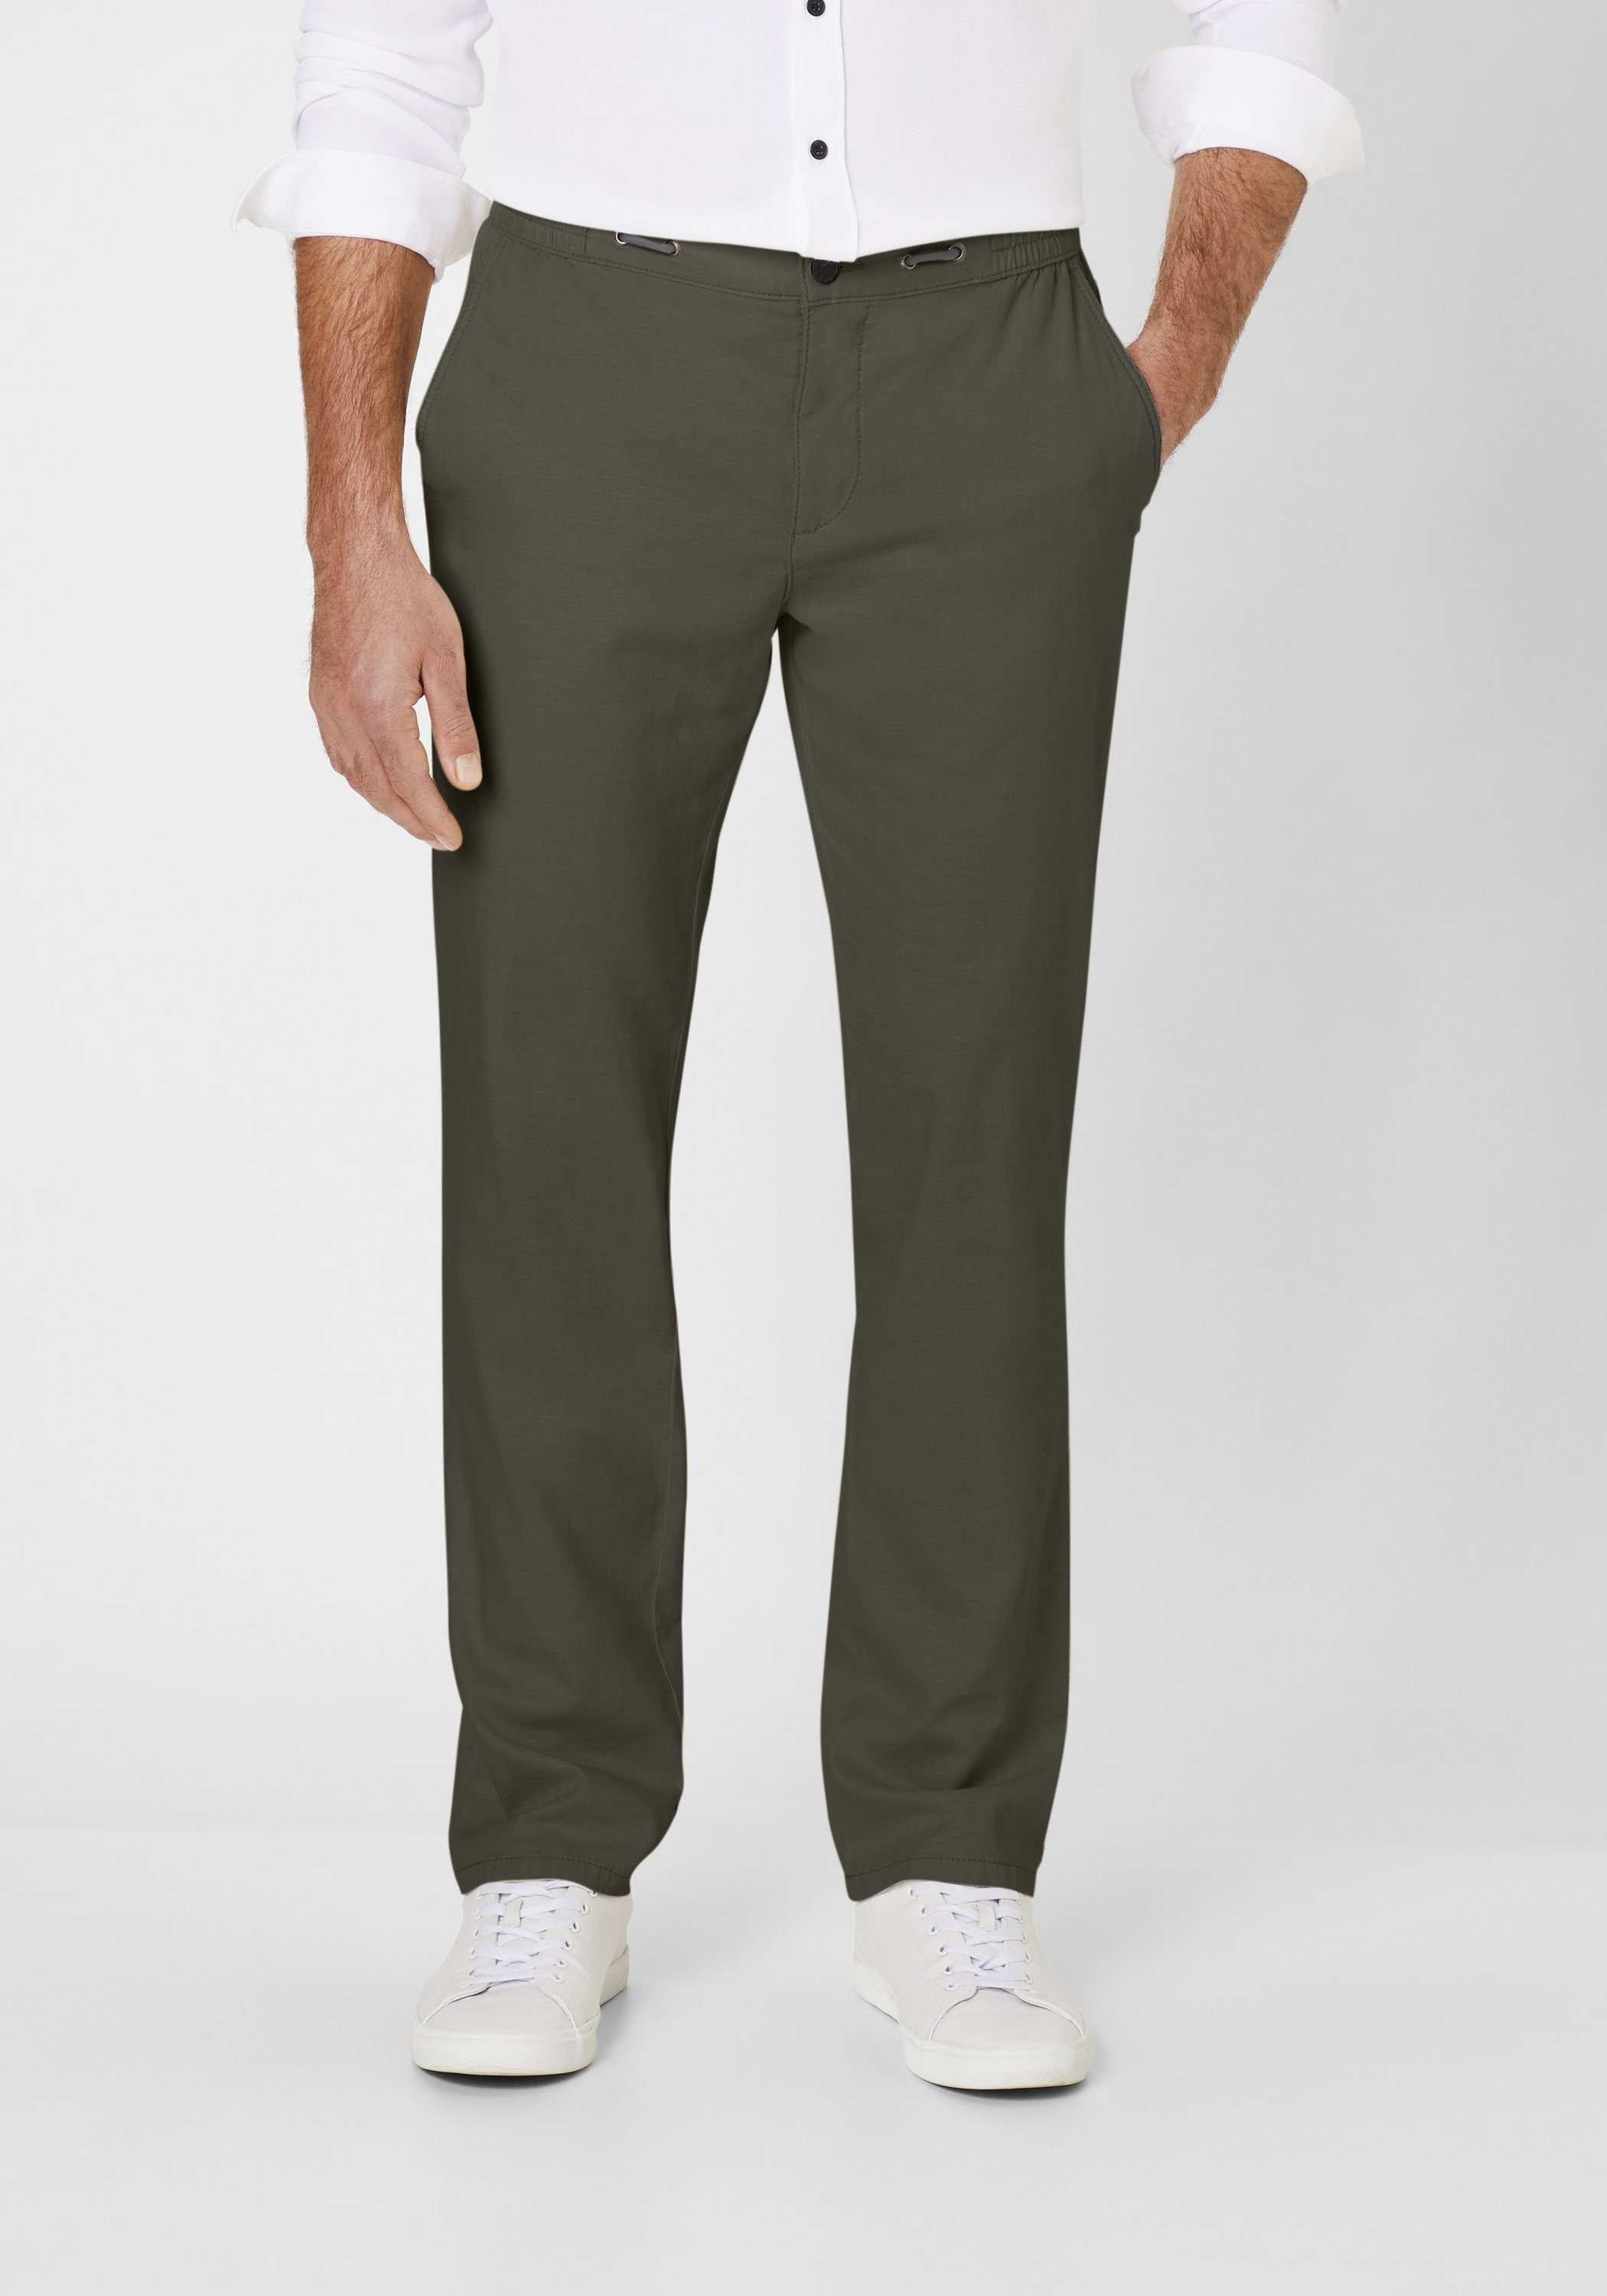 Redpoint Sehr oliv Stretch-Chinohose Carden leichte Chinohose